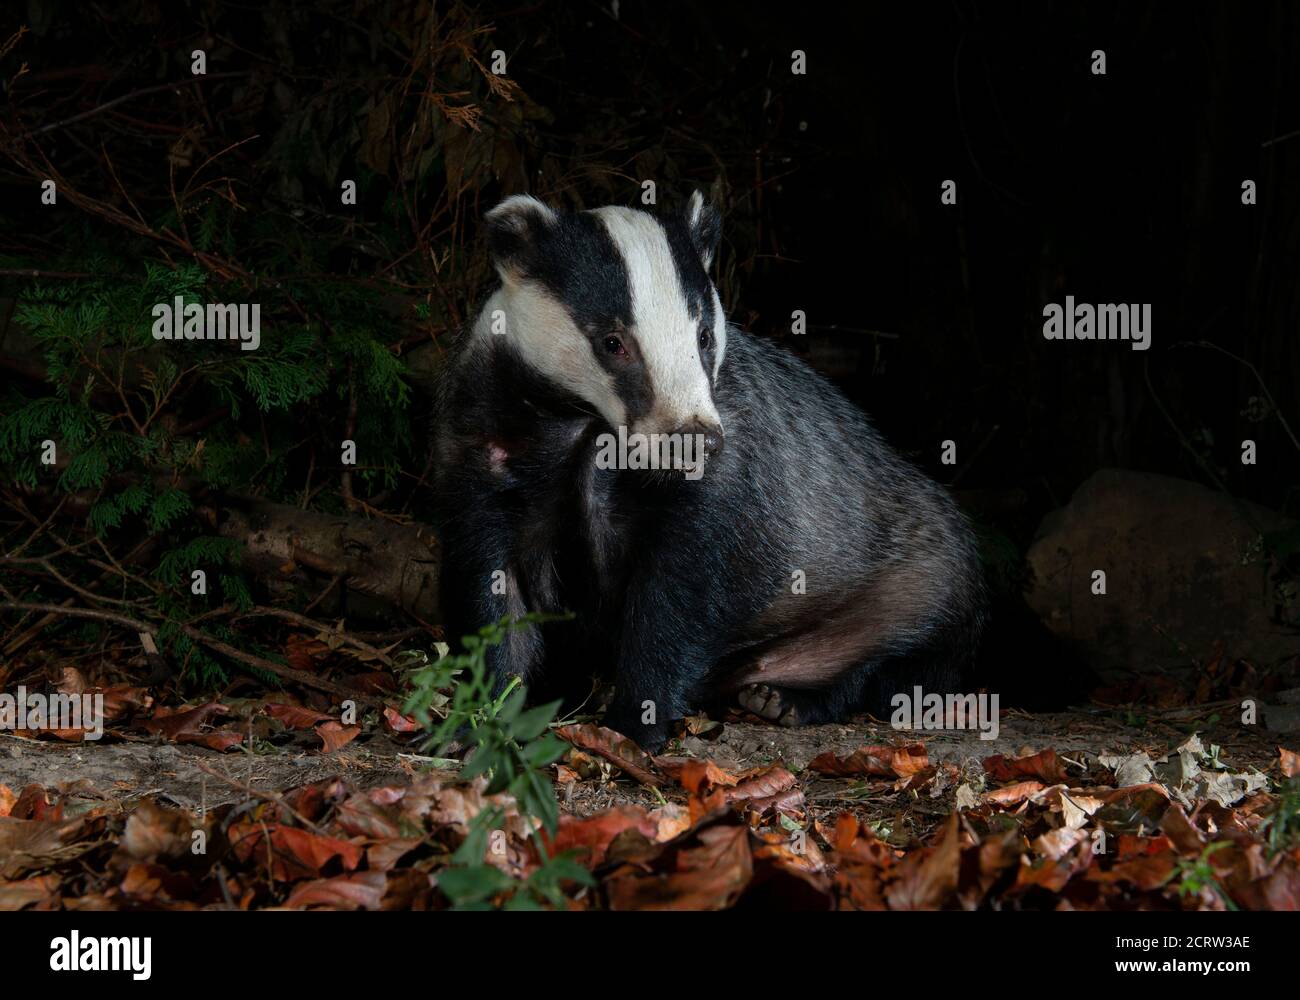 Badger sitting on ground among dead leaves at night looking forwards Stock Photo